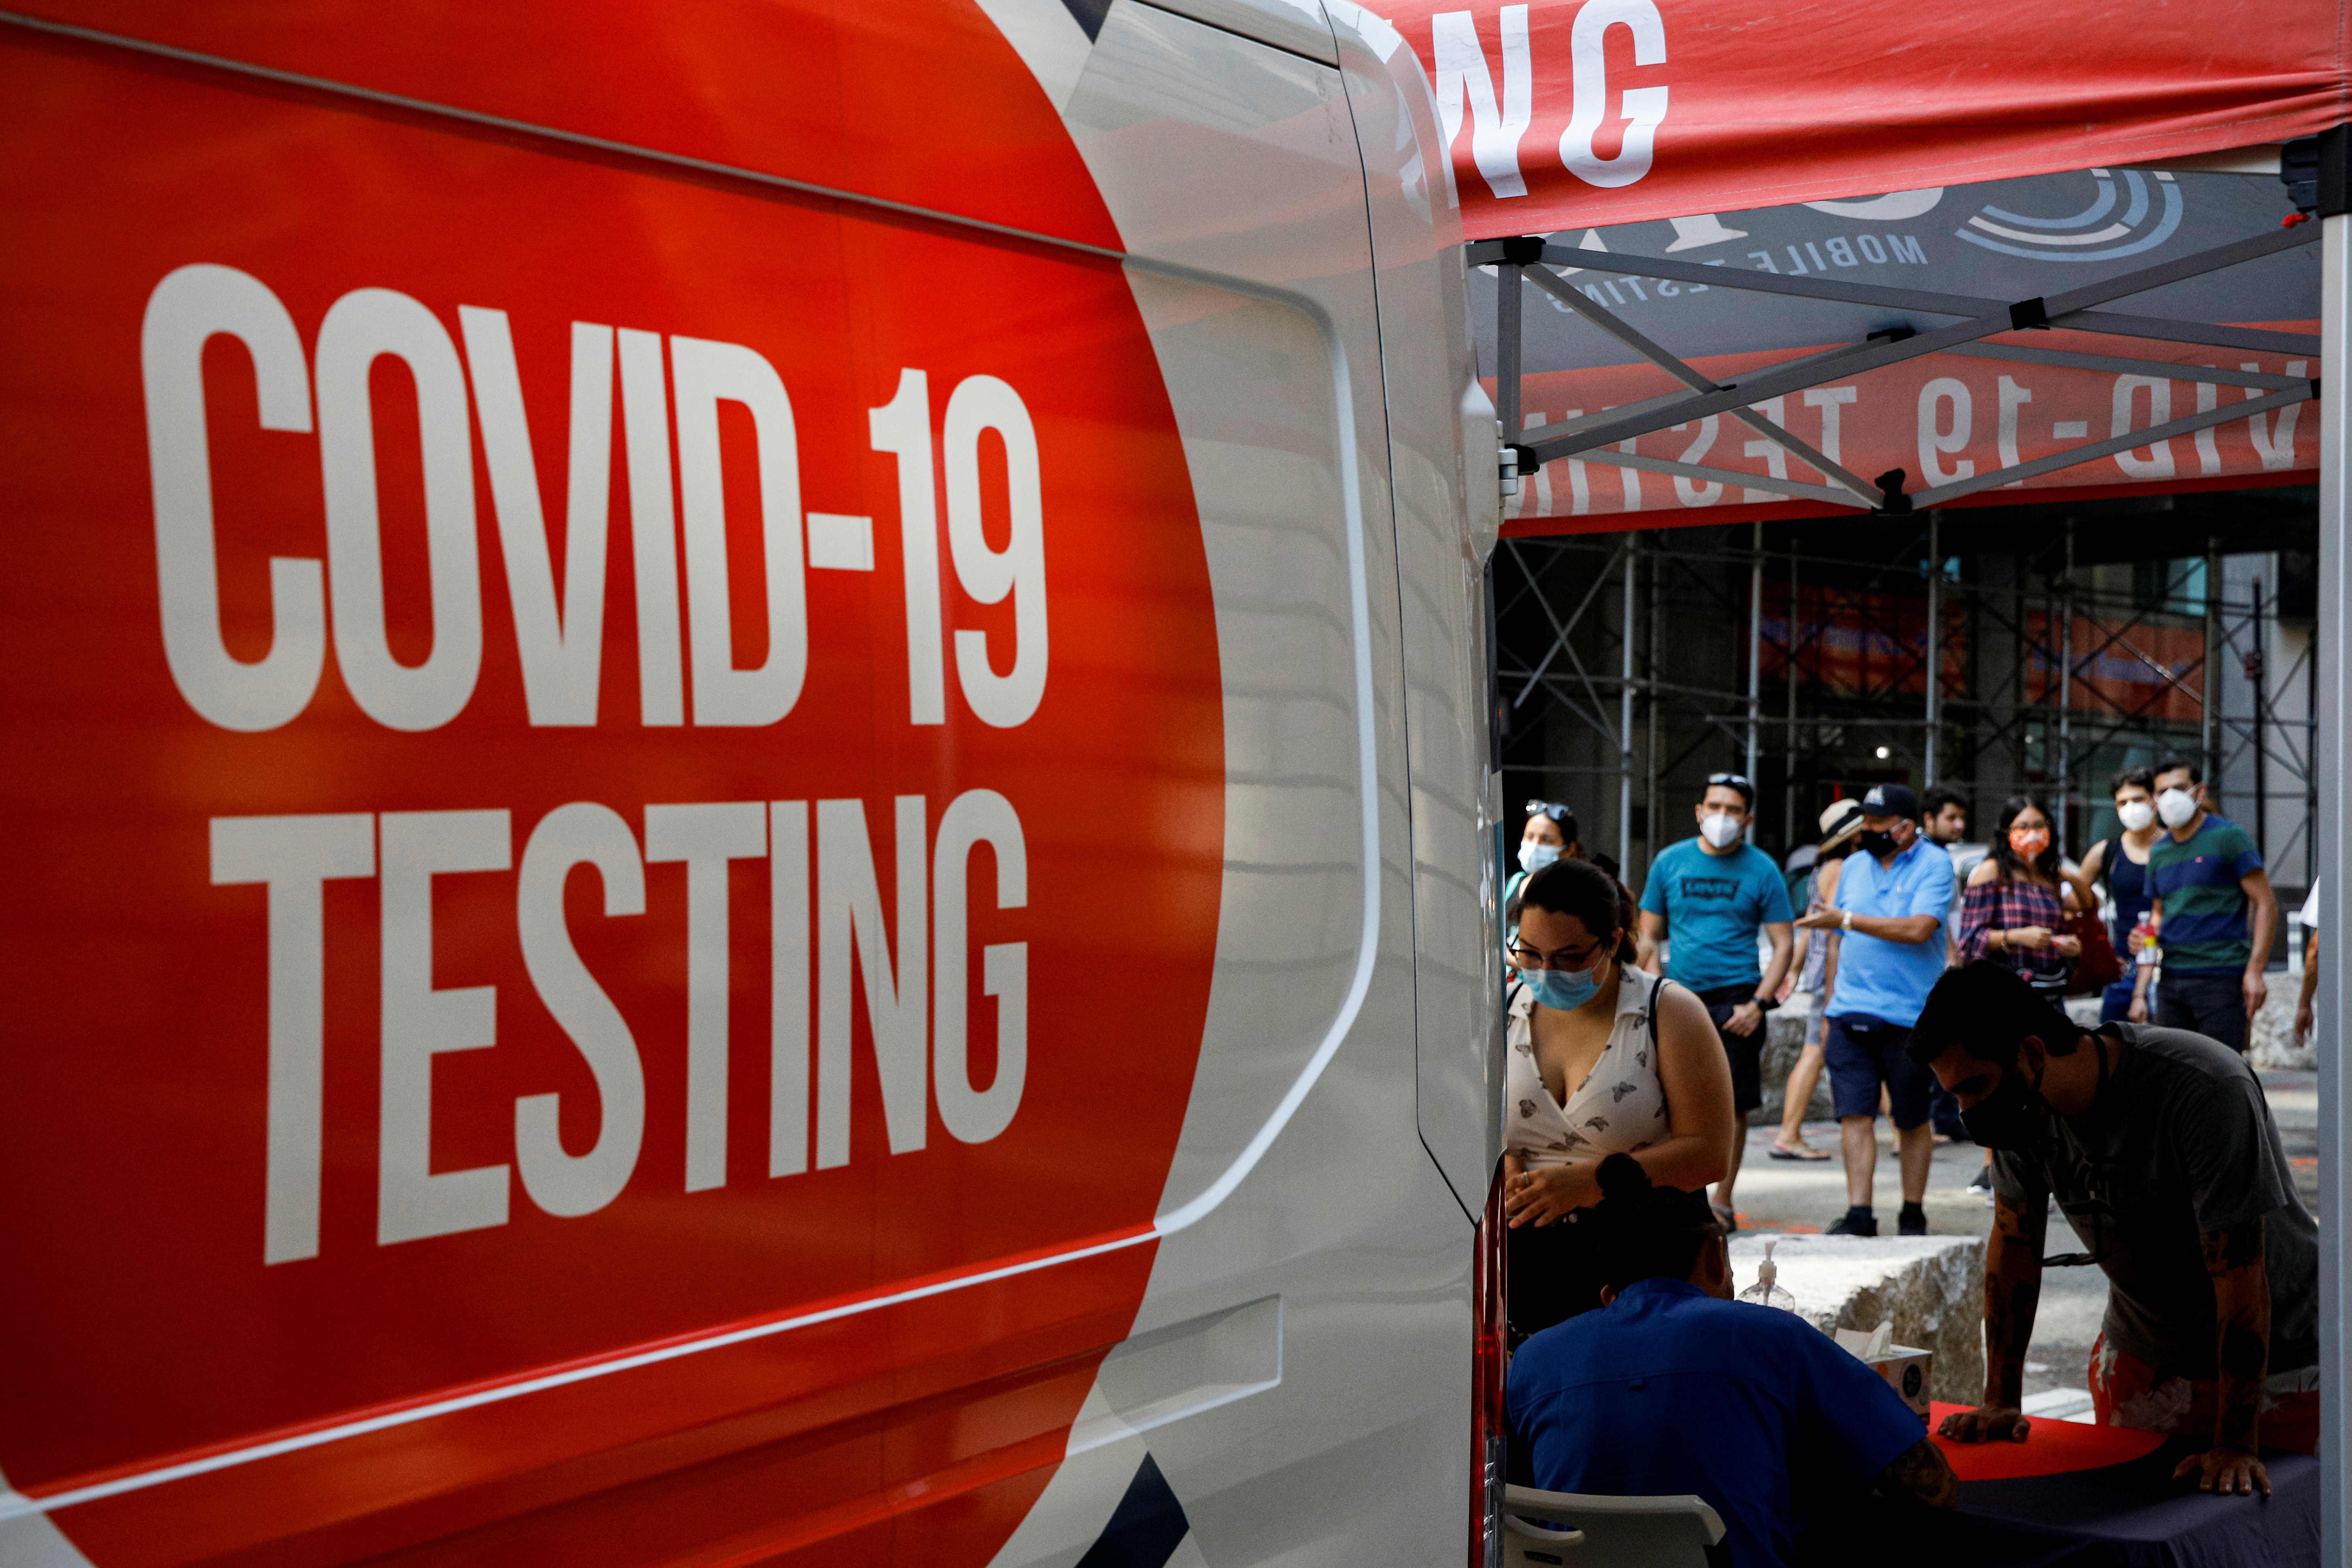 People line up at a coronavirus disease (COVID-19) testing at a mobile testing van in New York